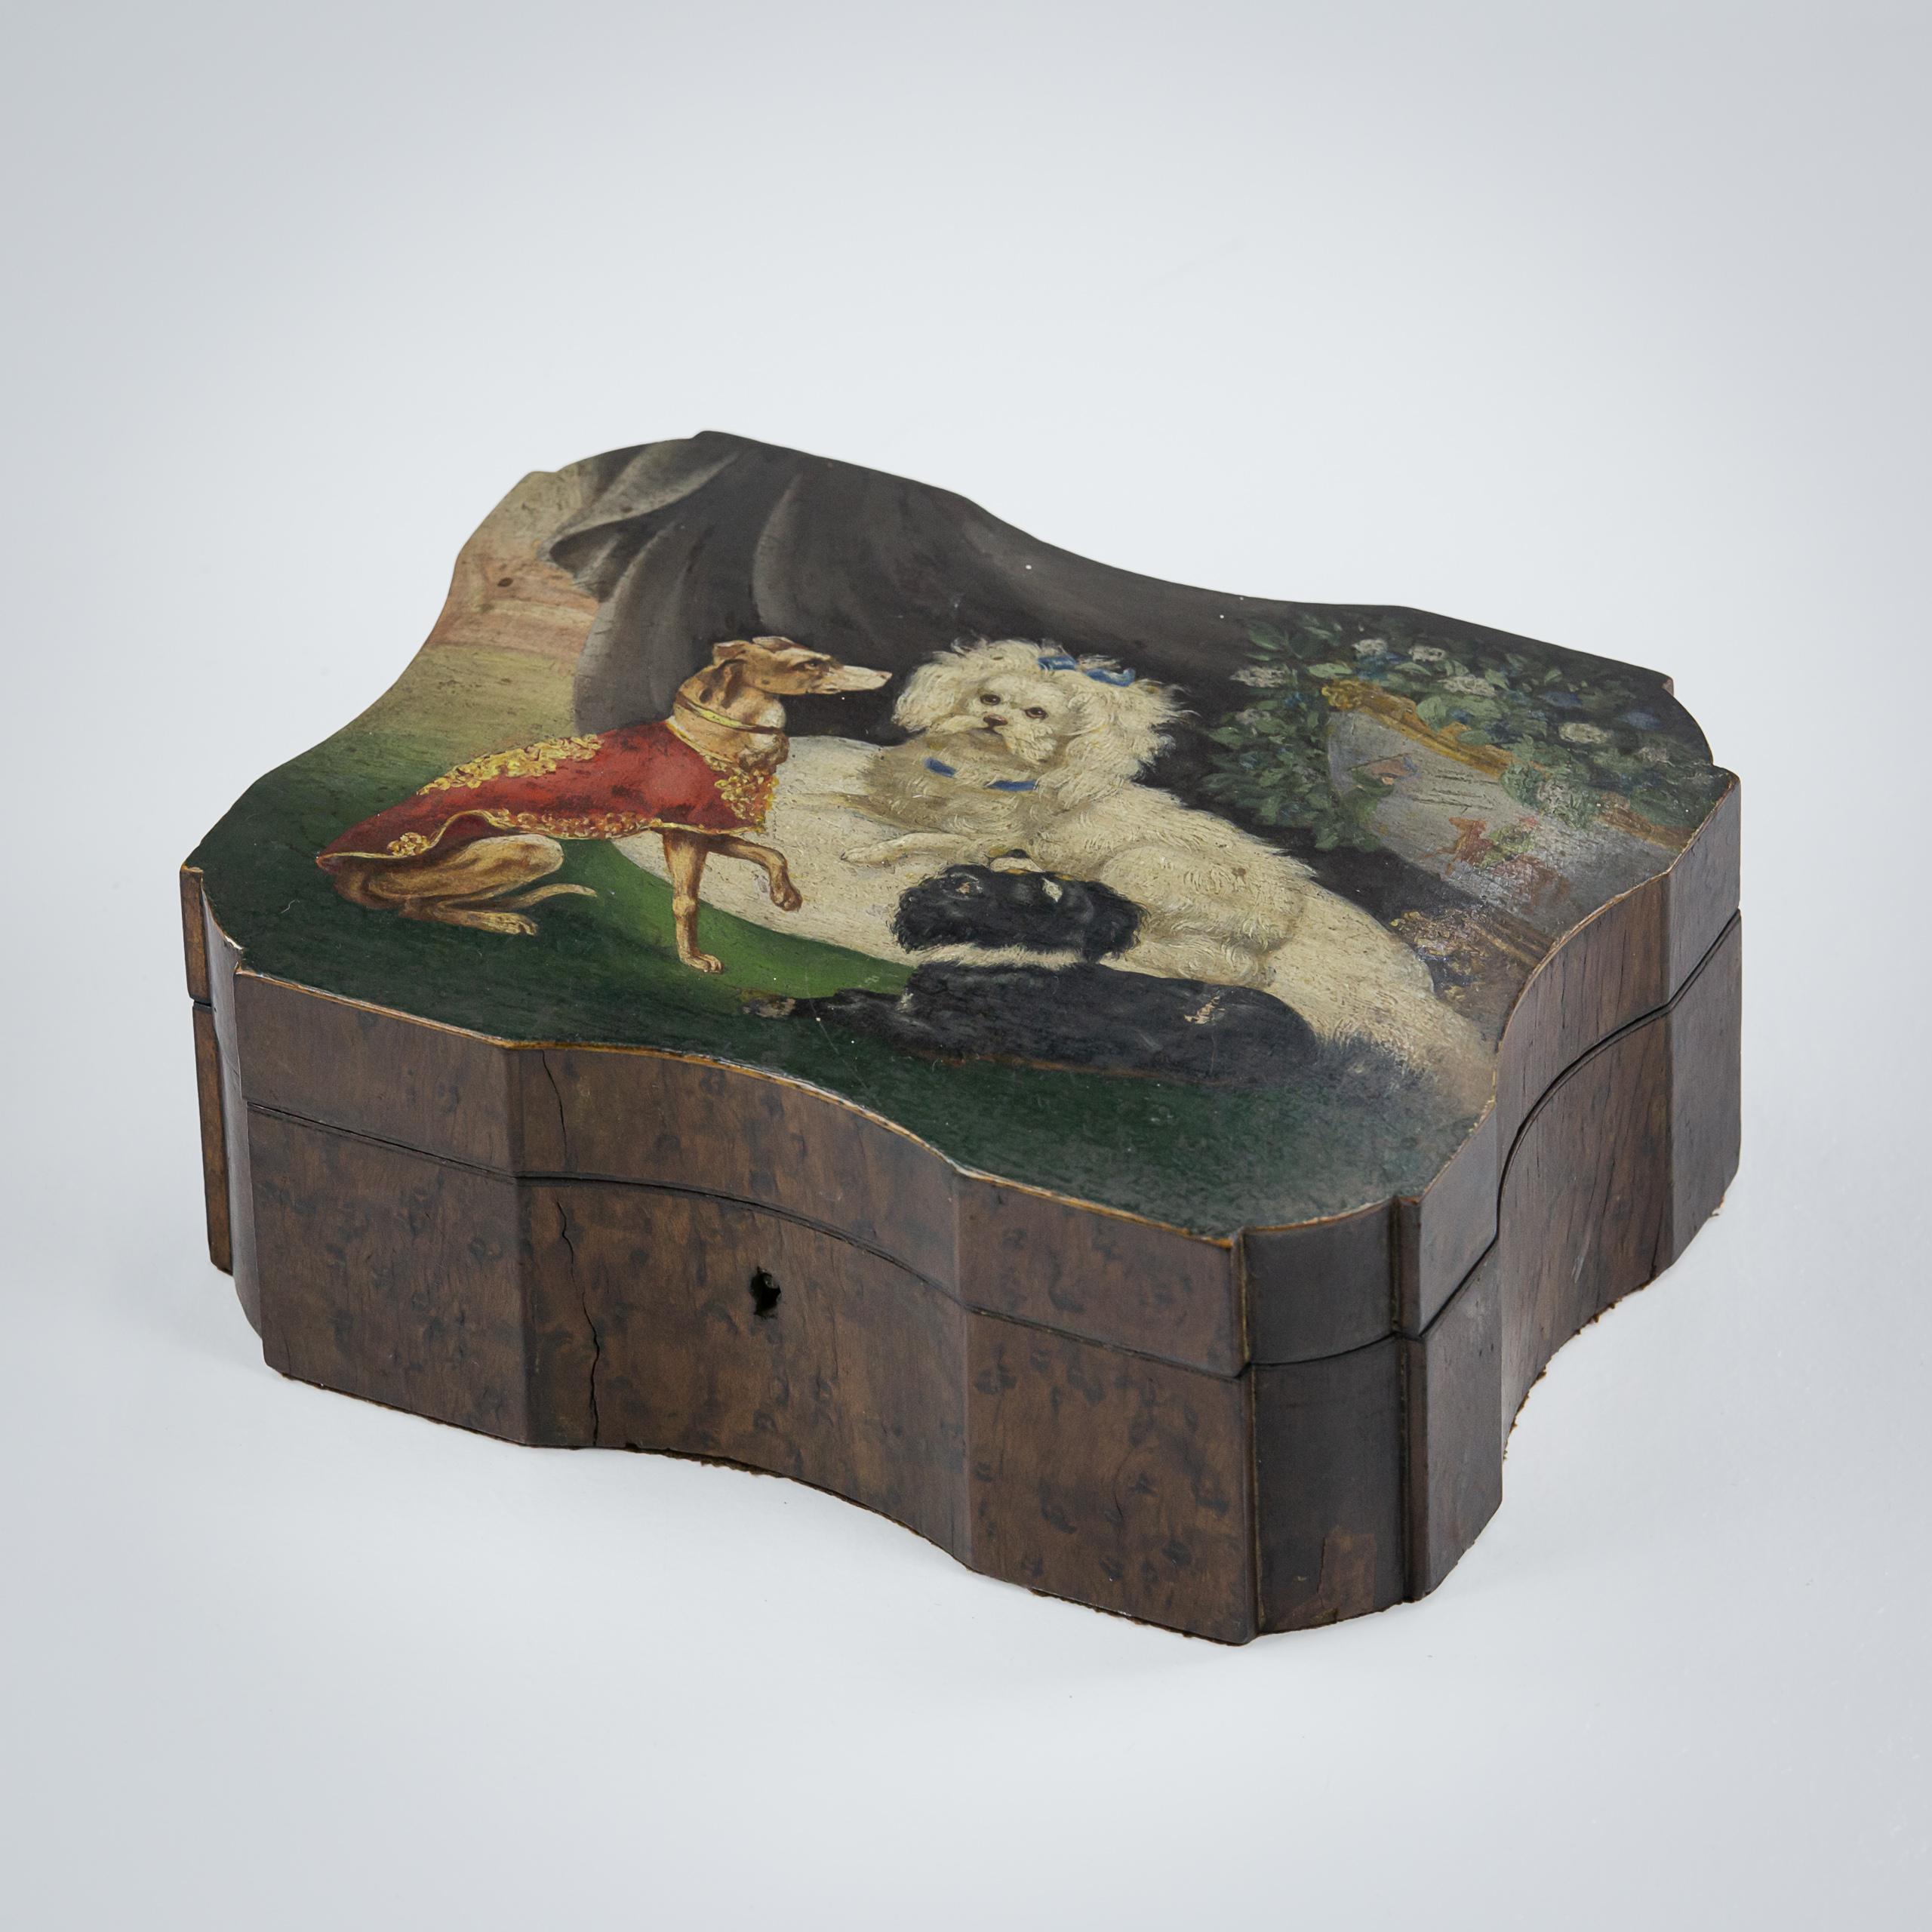 19th Century Jewellery Box in Burr Walnut, remarkable painted top of three dogs the proudest of which nestles in a cushion surrounded by fine drapery and a overflowing chinoiserie vase. Quite likely to be a commission of the owner. France, Circa